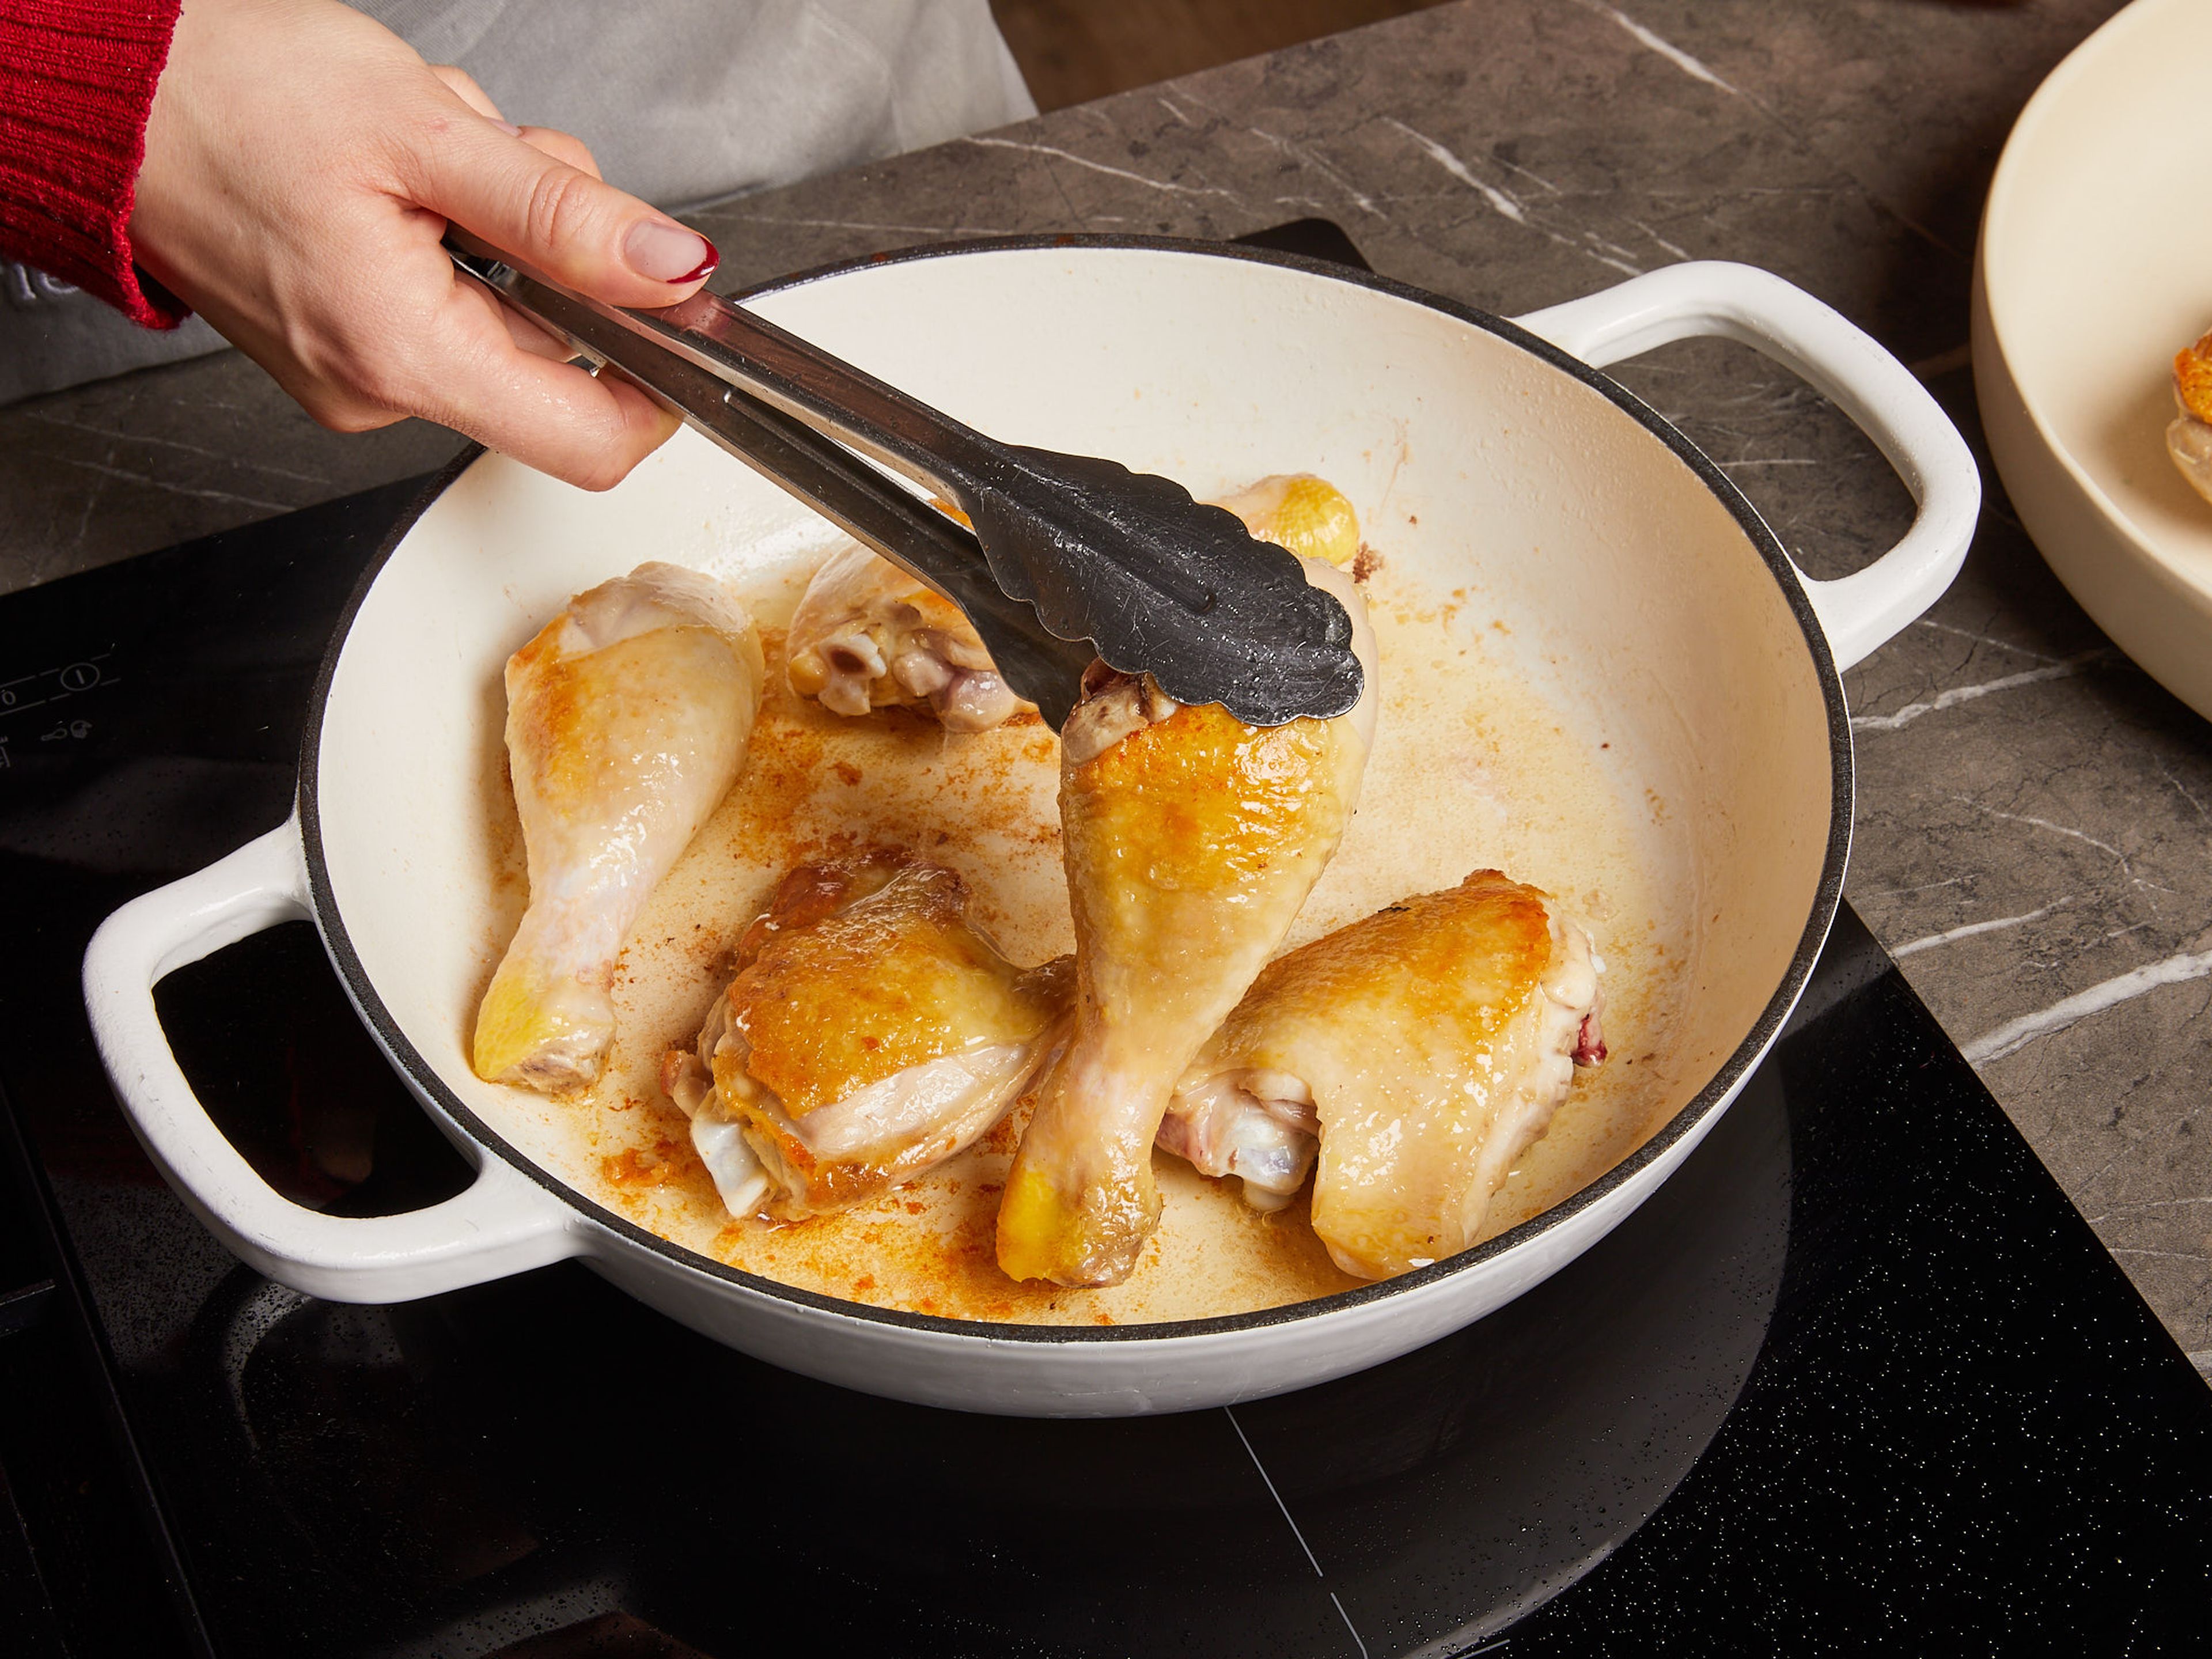 Heat a little oil in a large pan. Salt the chicken thighs and fry all over until the meat is golden brown on both sides. Then remove the chicken thighs from the pan.